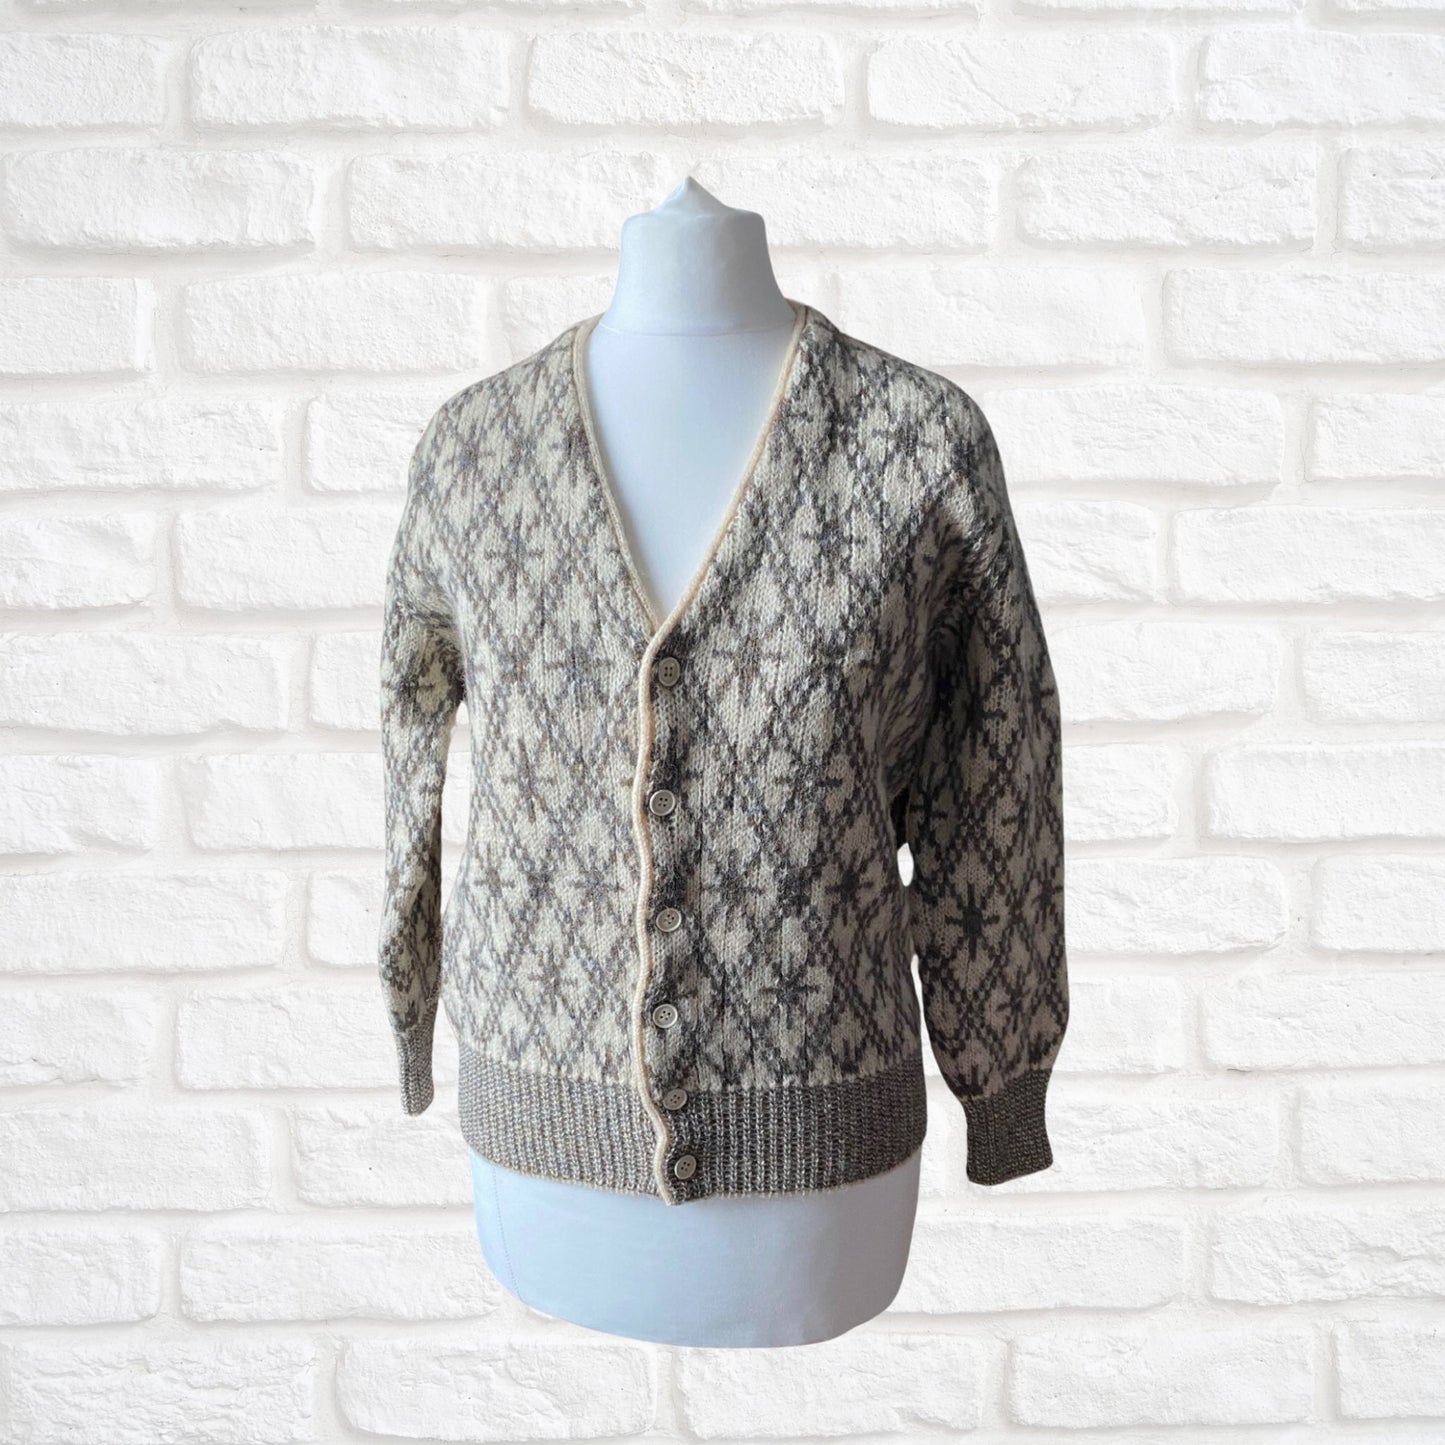 Vintage cream, brown and grey Nordic style wool cardigan. Approx U.K. size 6- 8